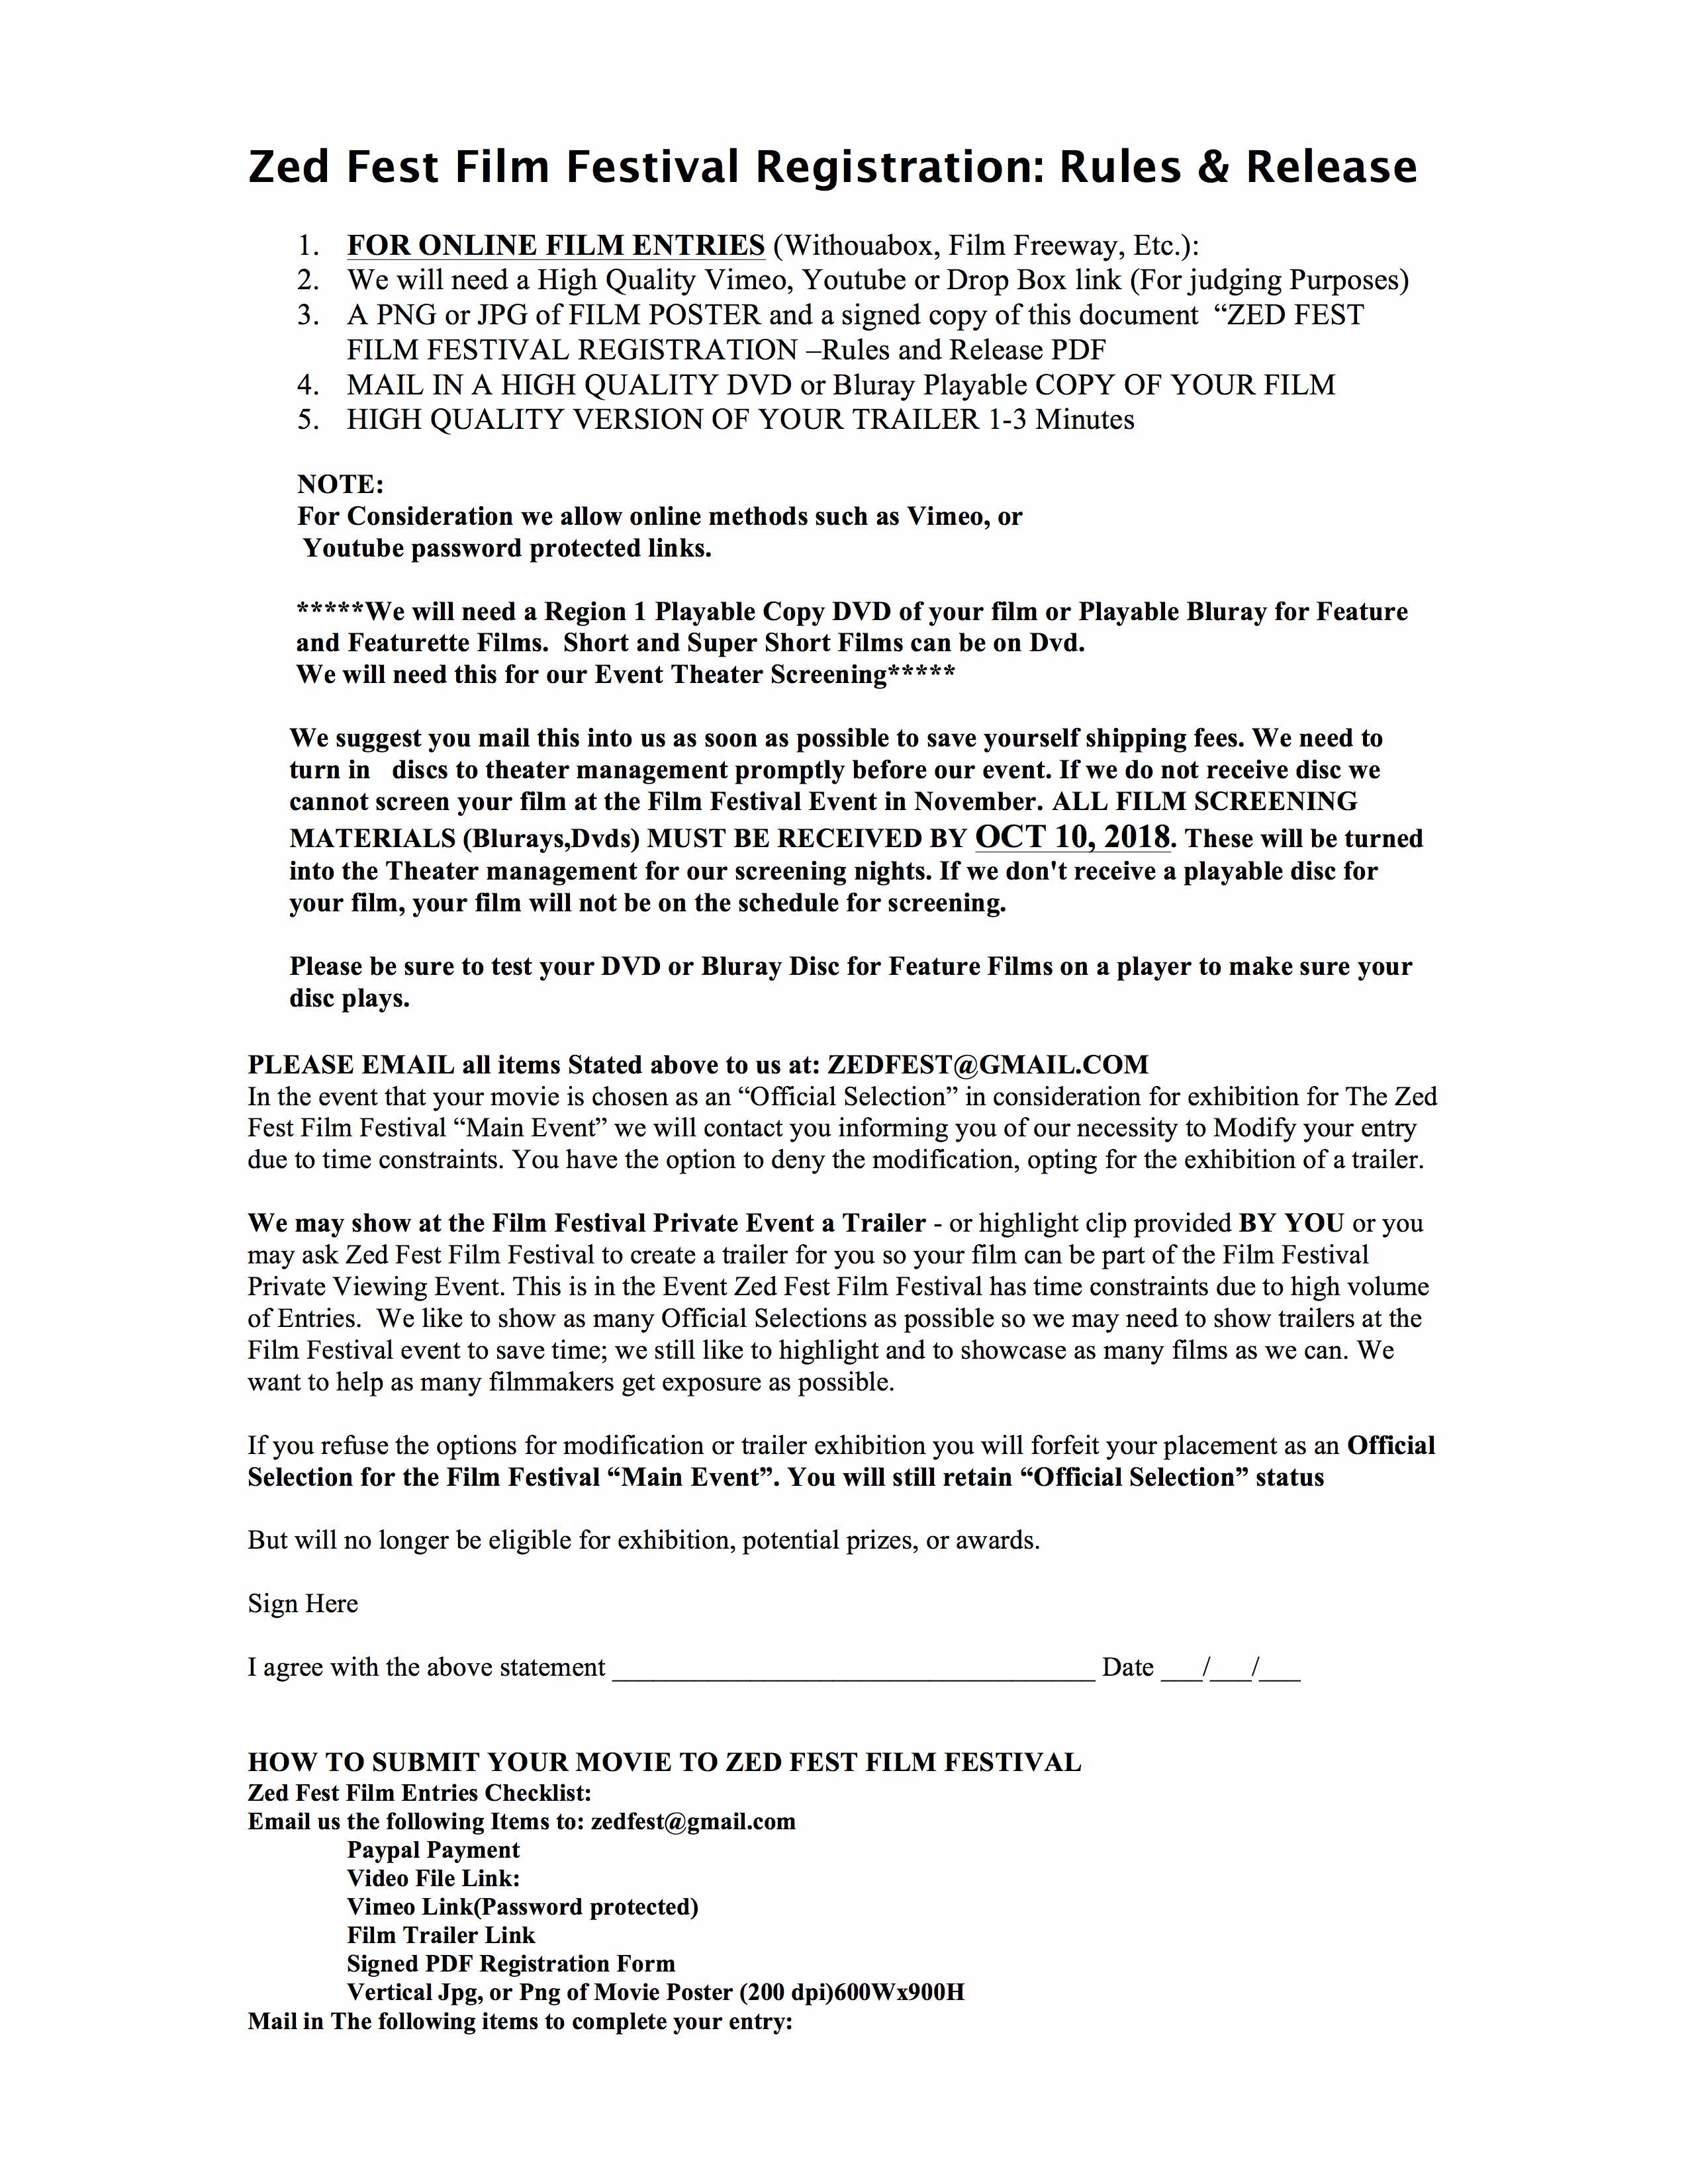 zed fest rules and Release form page 1